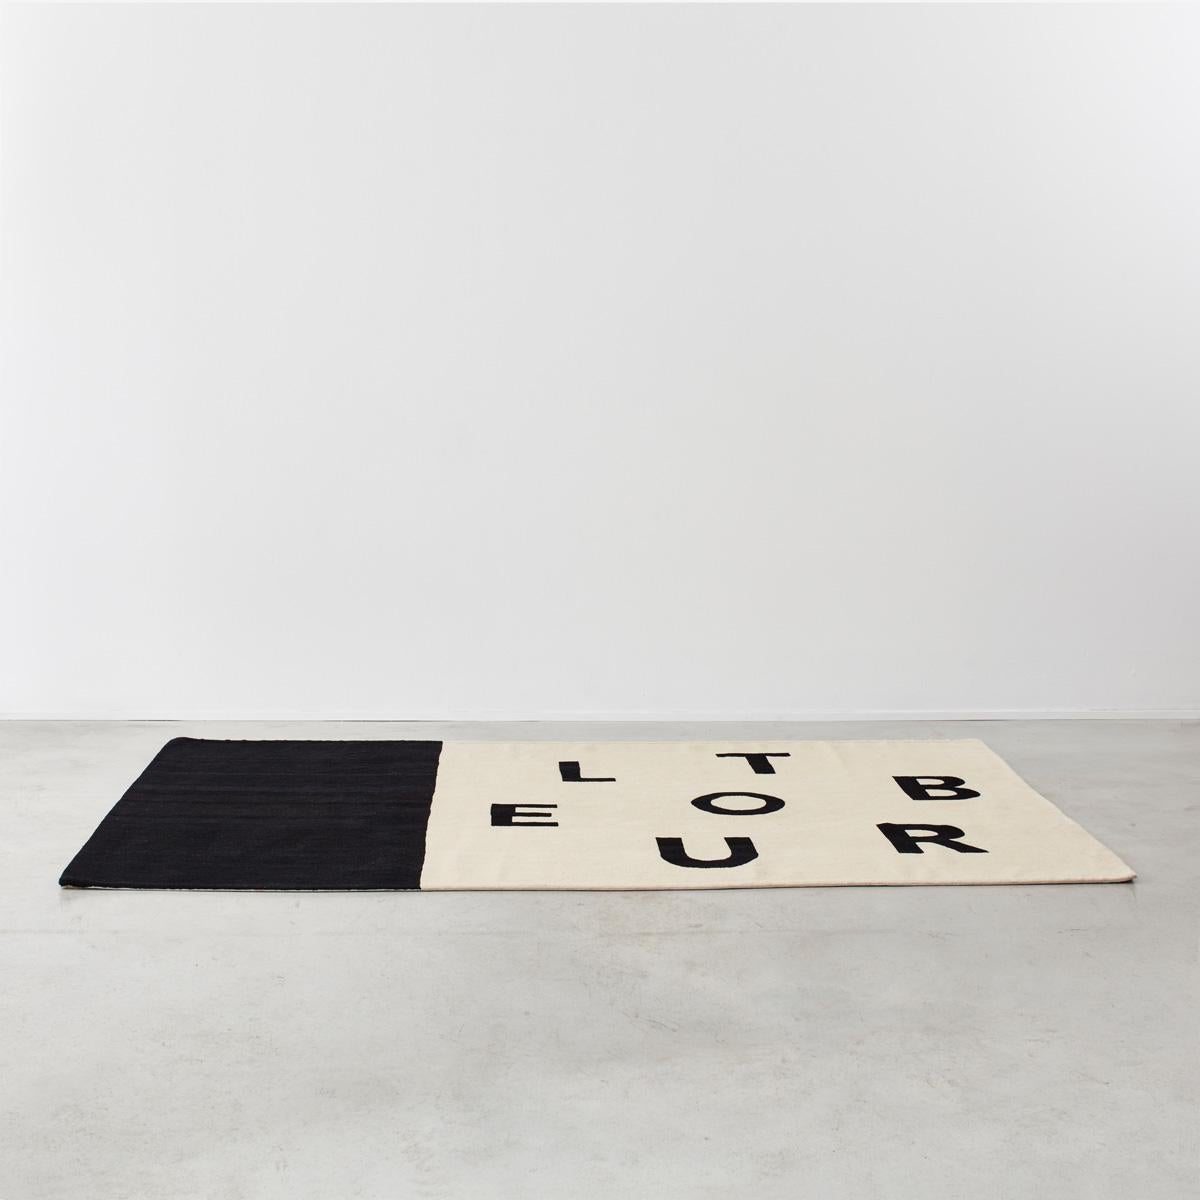 A limited edition, hand-woven rug from Chevalier Édition by the French artist Philippe Cazal (1948-present). Cazal’s work, which is owned by the Pompidou Centre among other collections, explores the power of the written word, especially how